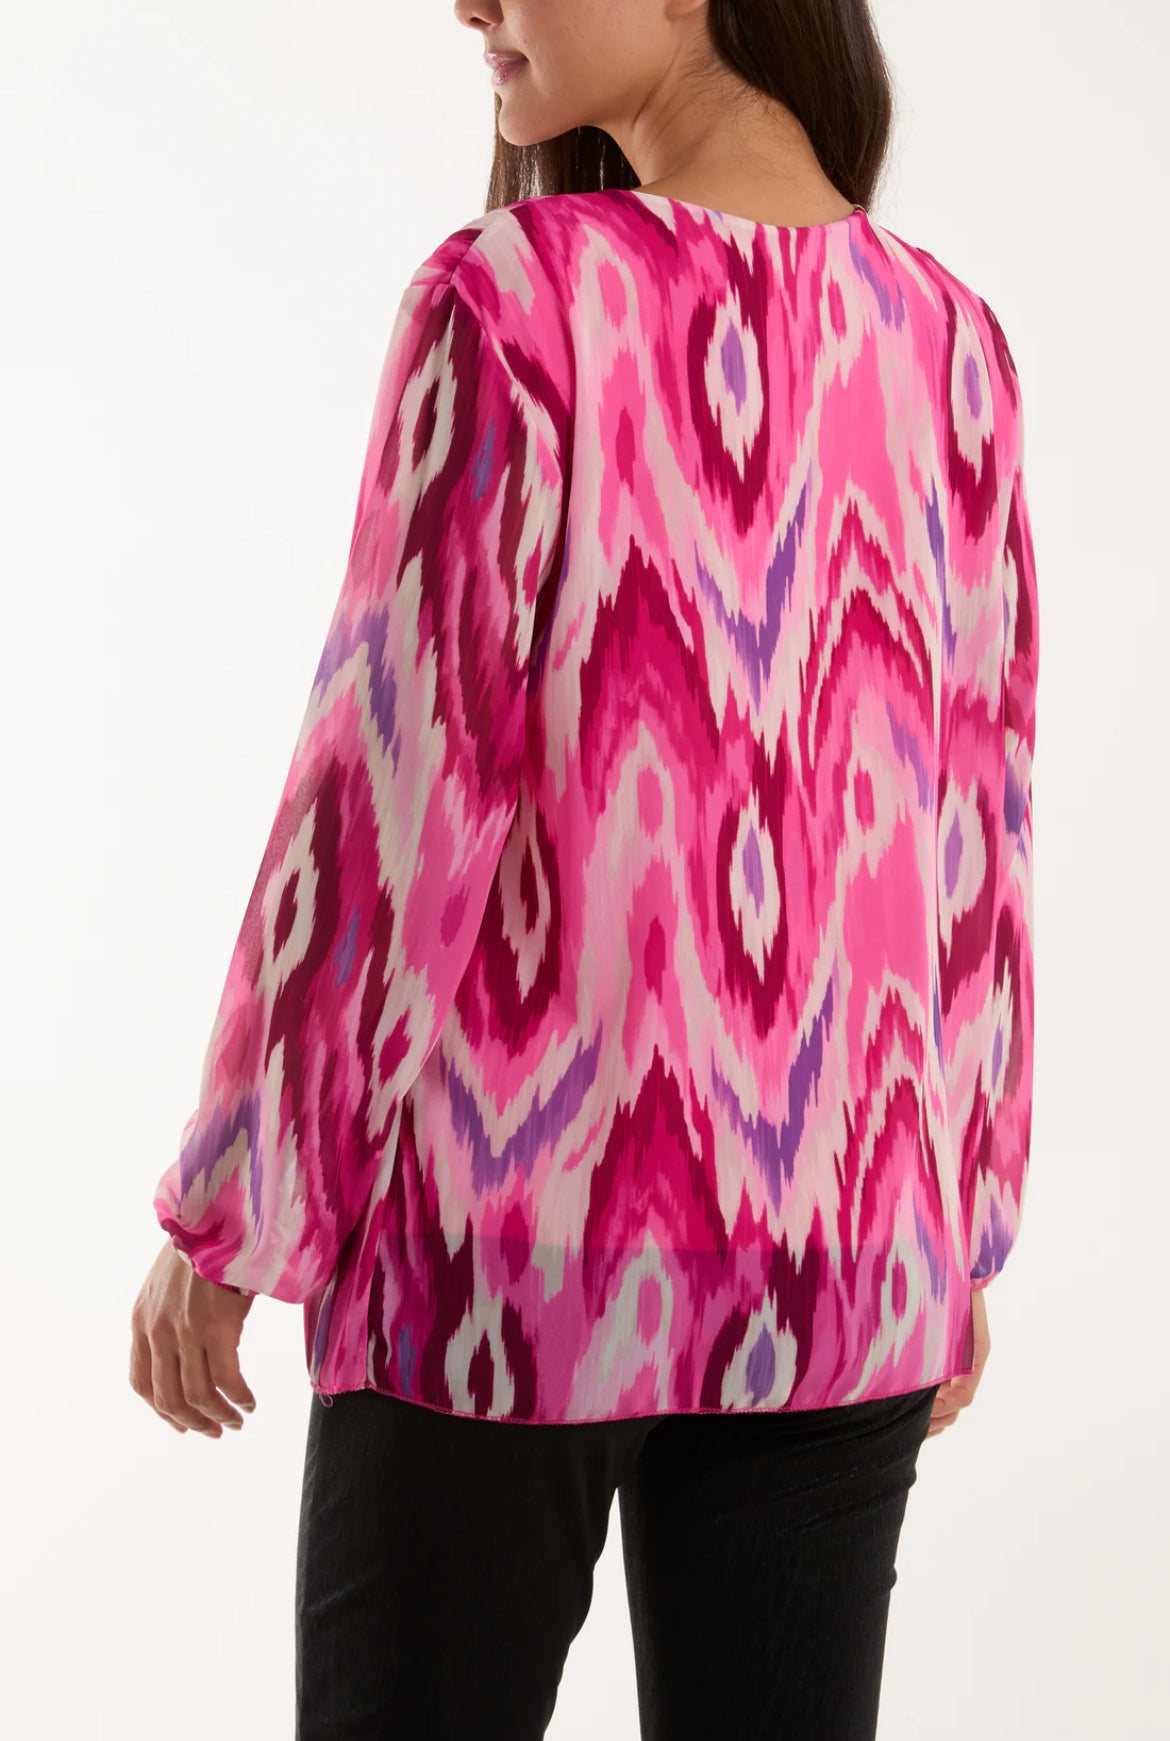 ISSY - Long Sleeved Pleated Top - Pink Blurred Zig Zag - One Size